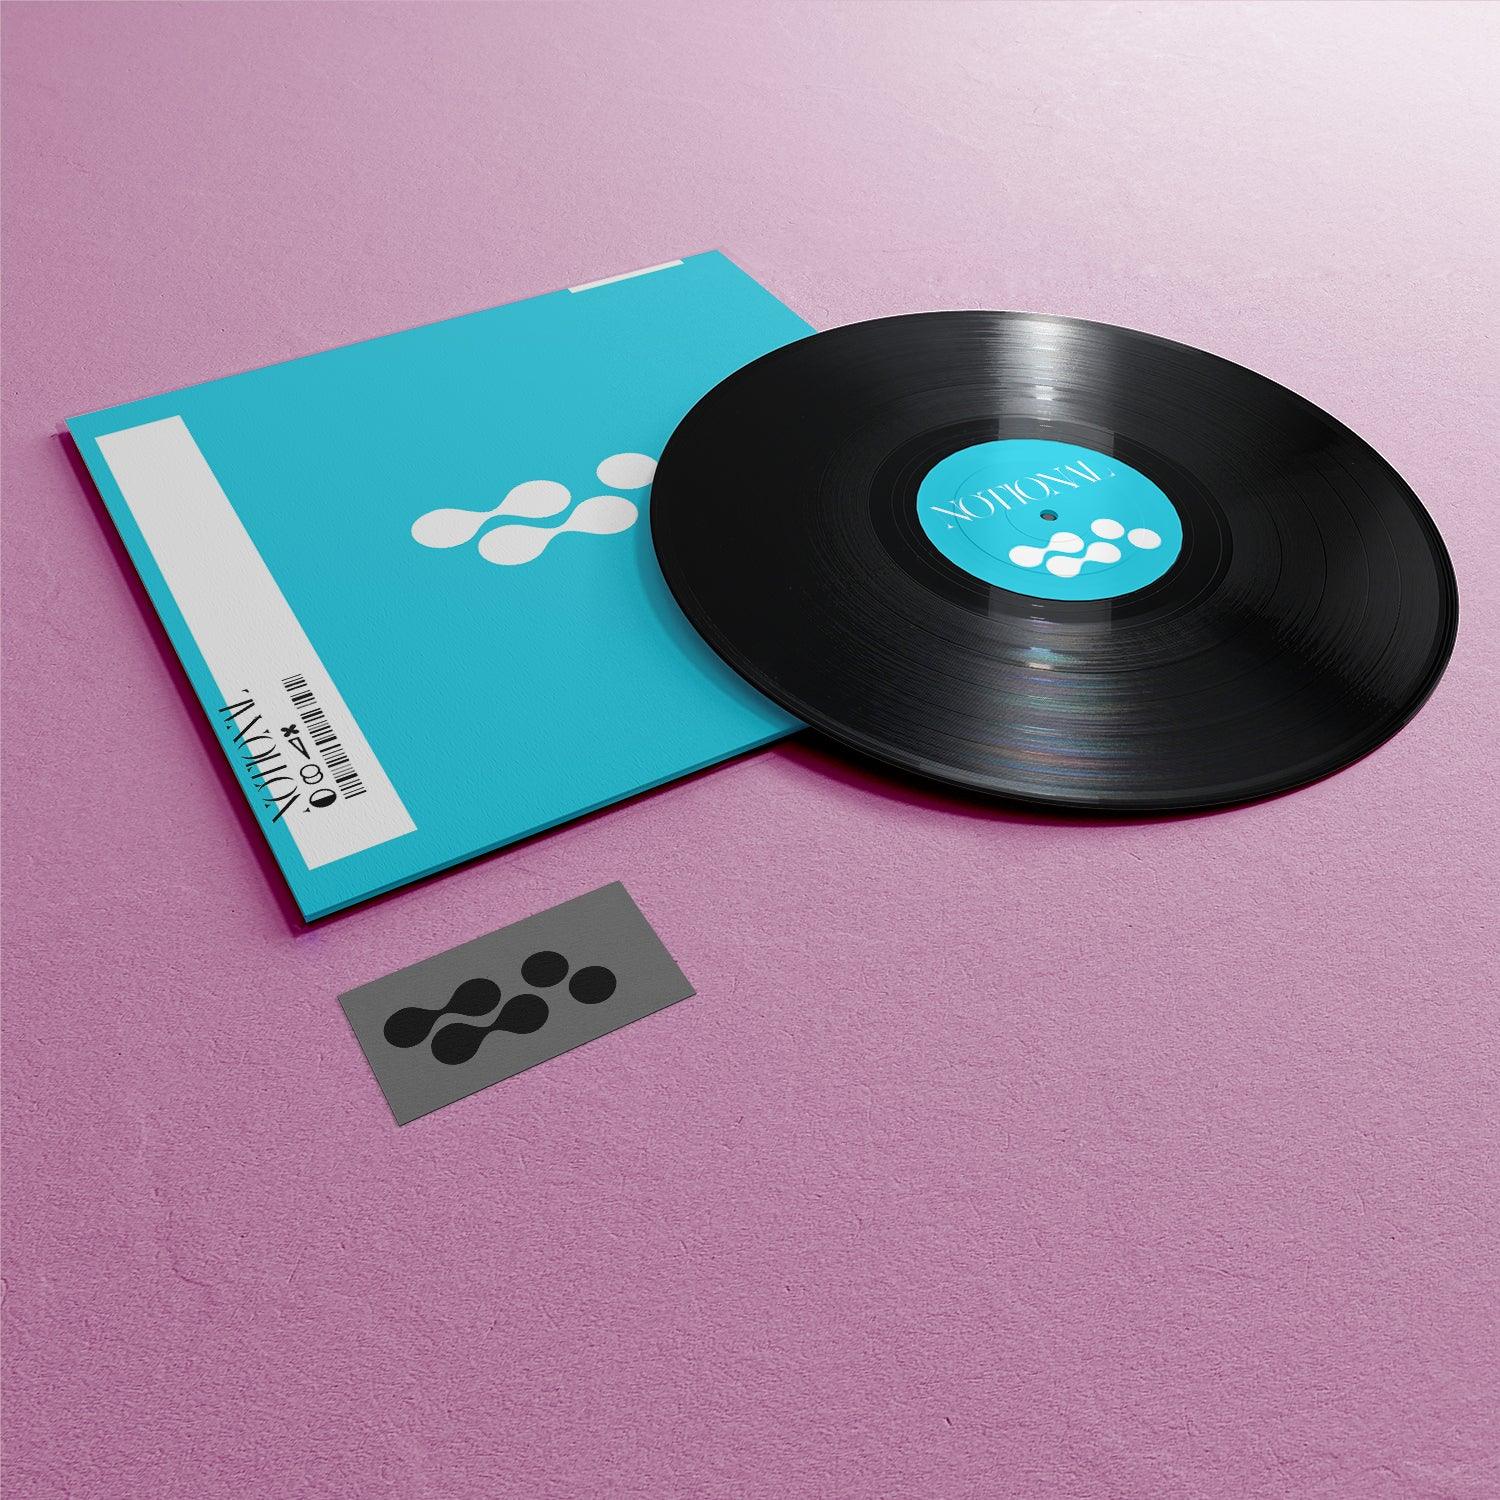 Customizable 12" Vinyl Mockup: Disc on top of Sleeve & Download Card. Design Your Dream Album Cover!